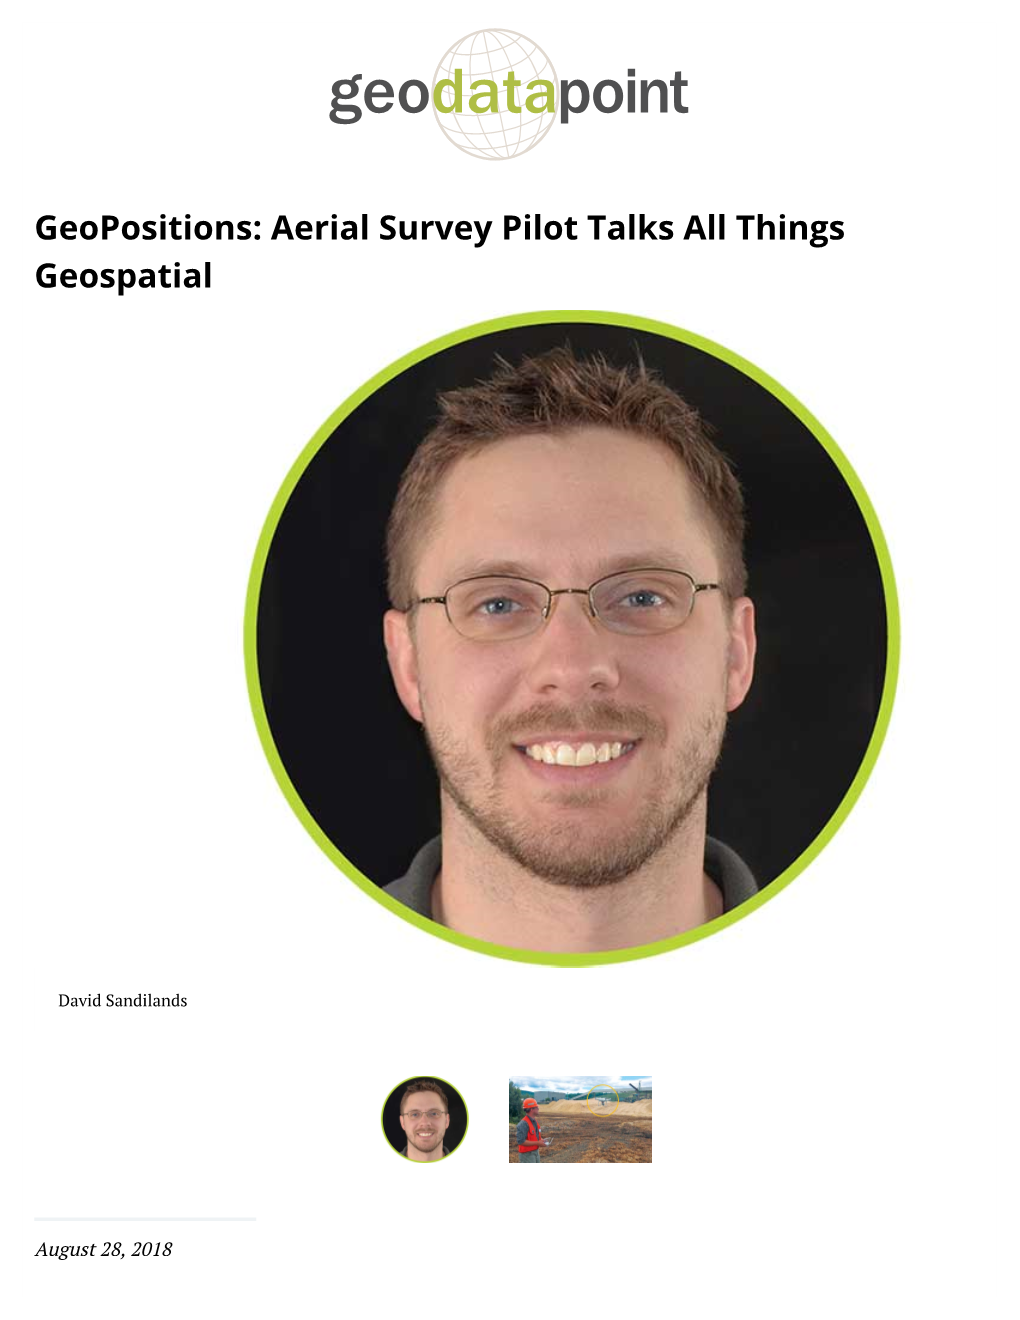 Geopositions: Aerial Survey Pilot Talks All Things Geospatial